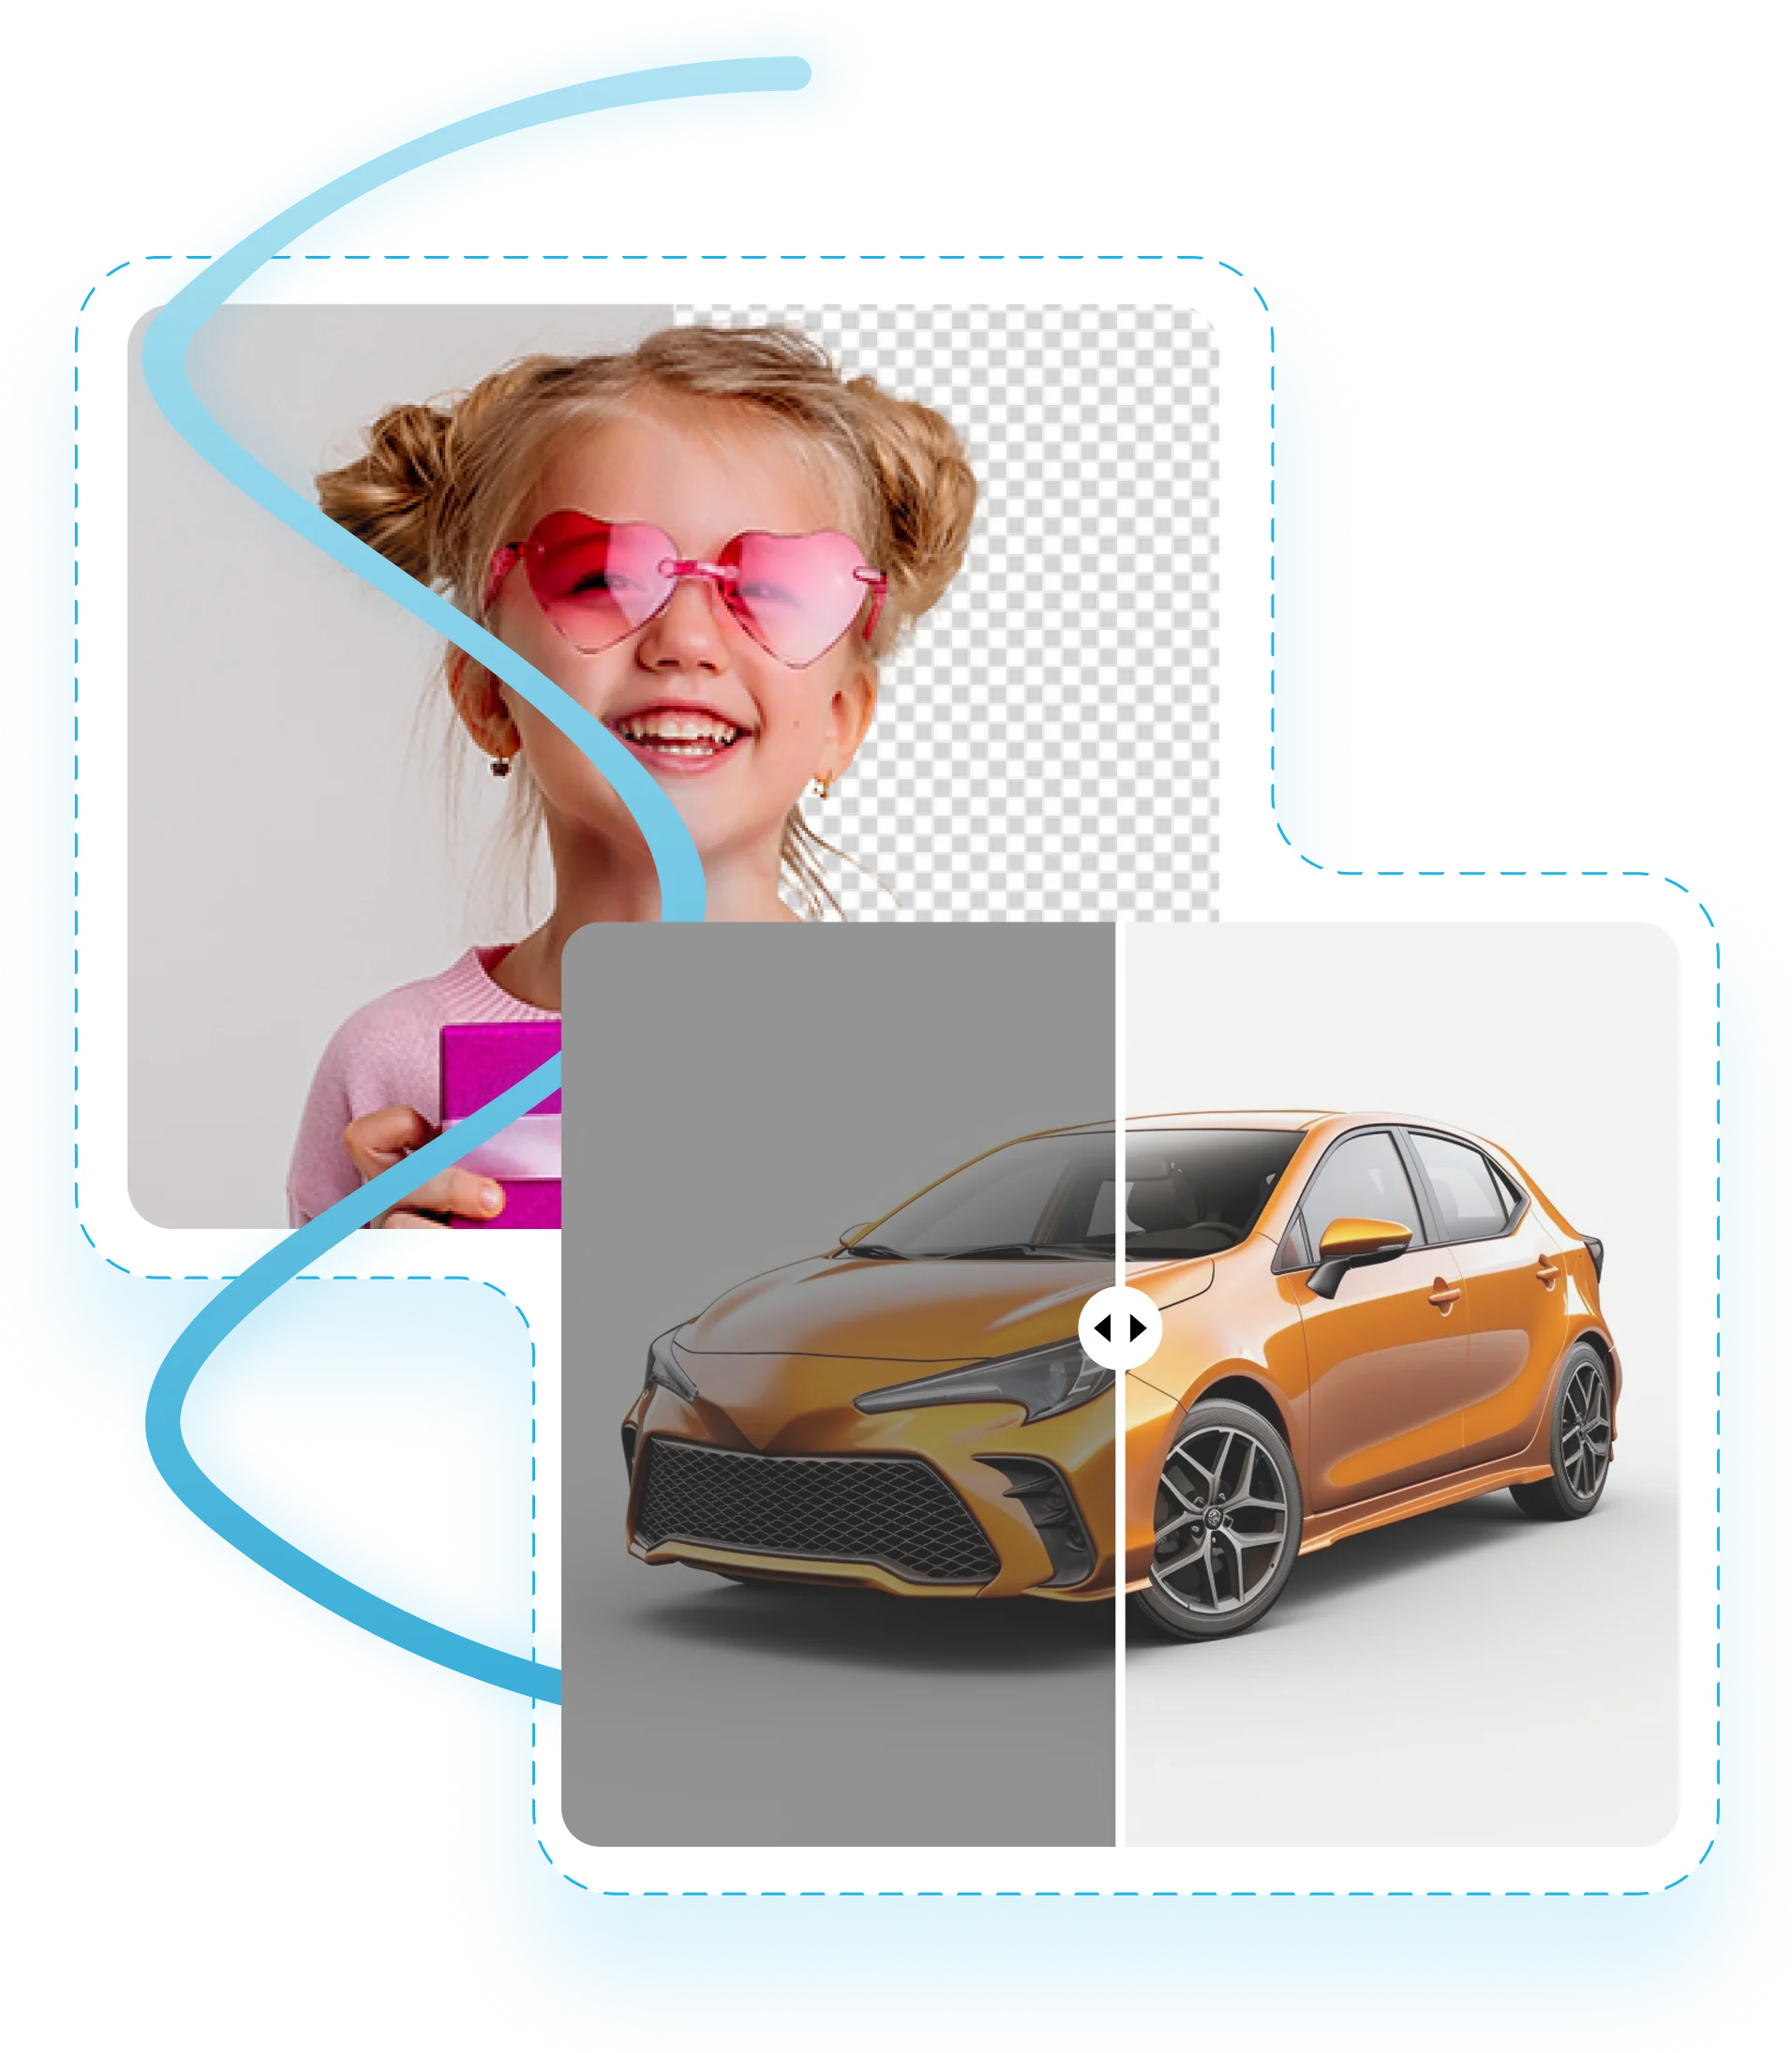 There Are Several Offers for Clipping Path and Photo Editing | Vertical Clipping